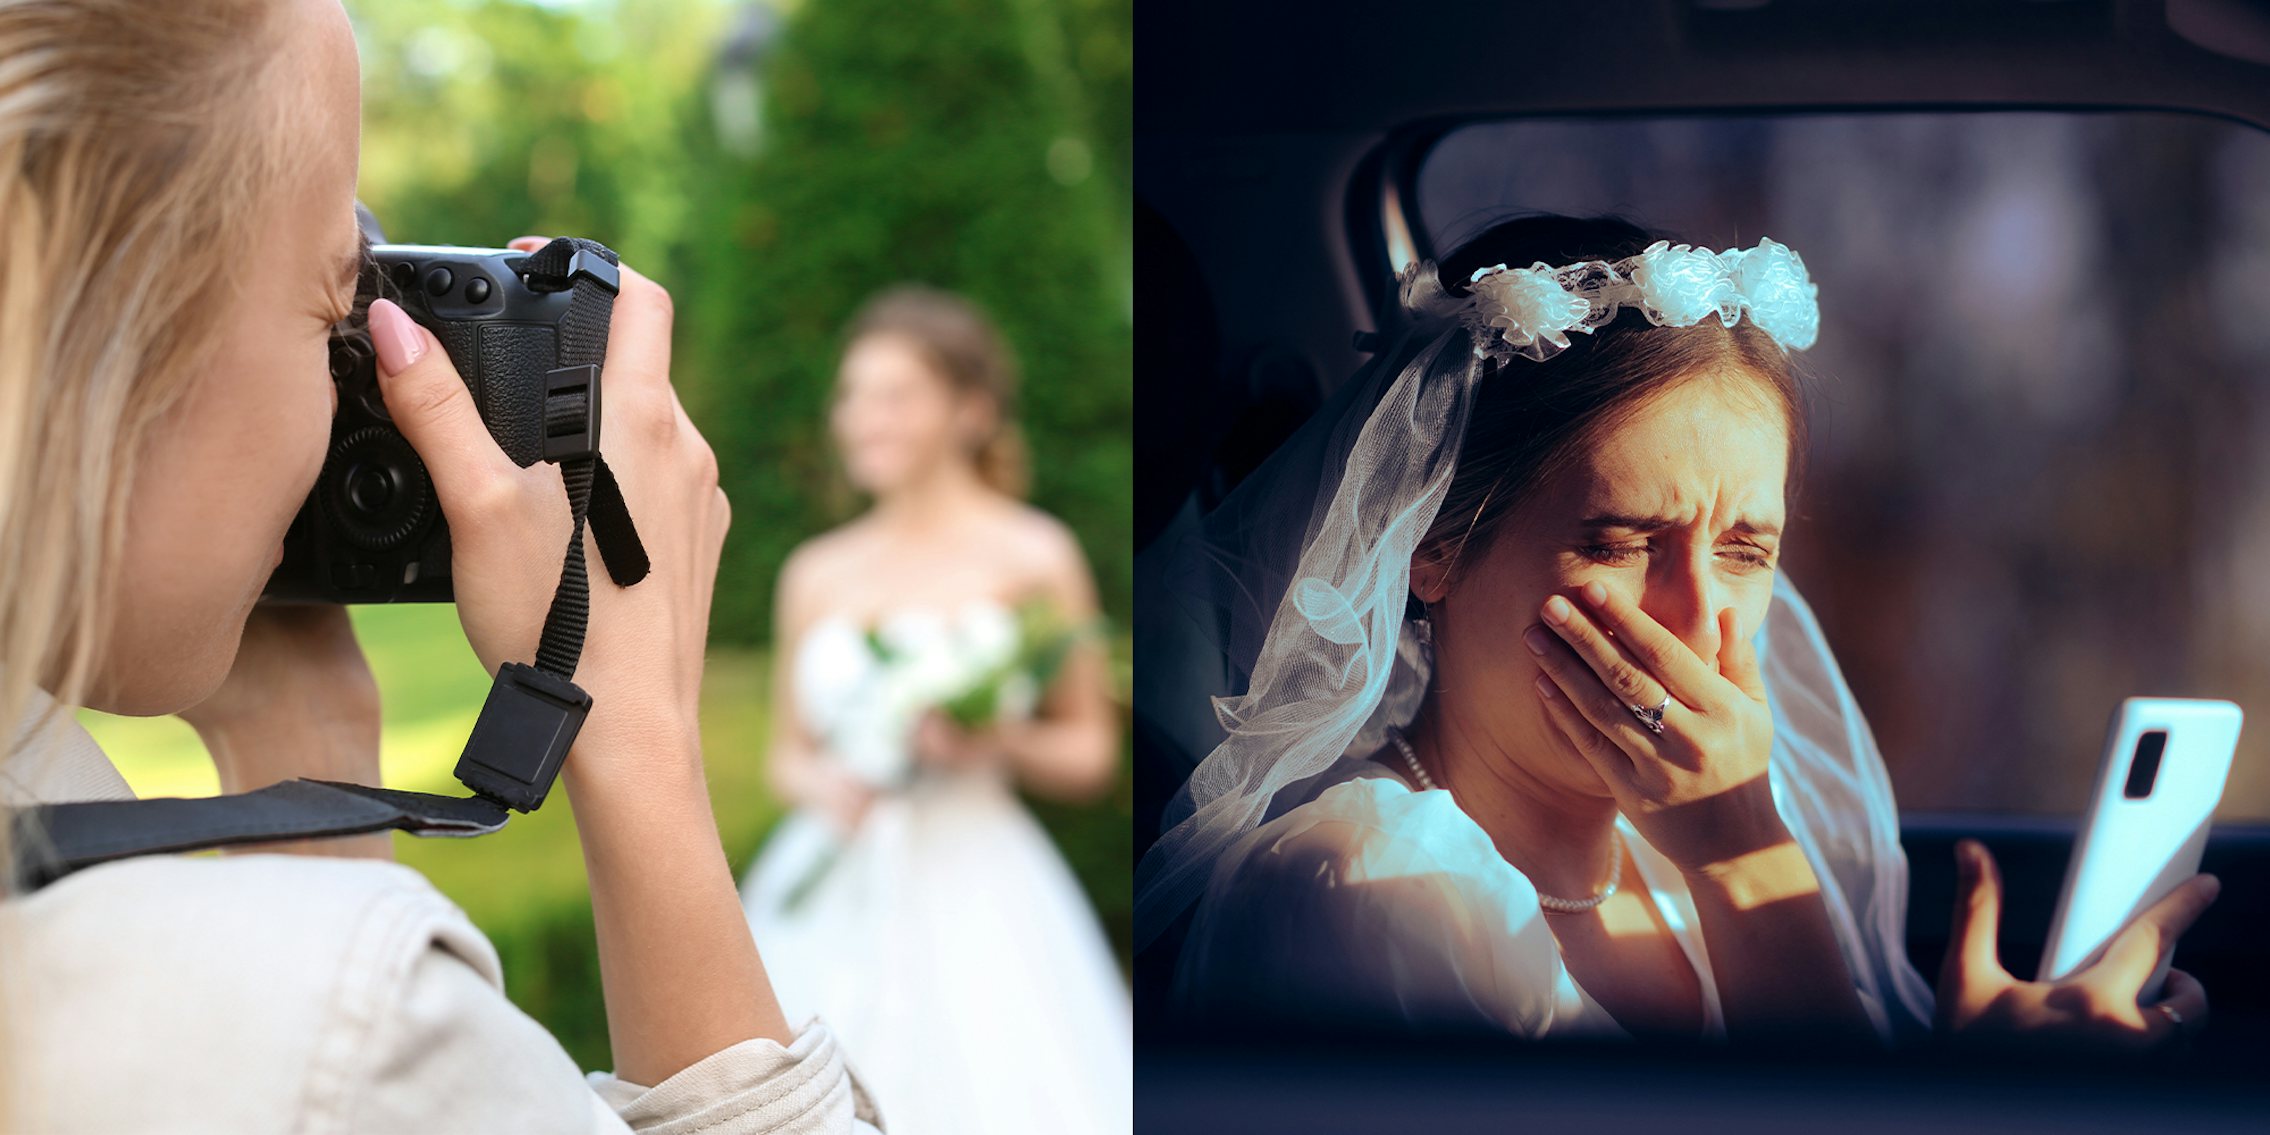 Female Photographer taking photo of bride; Bride Crying while looking at phone screen